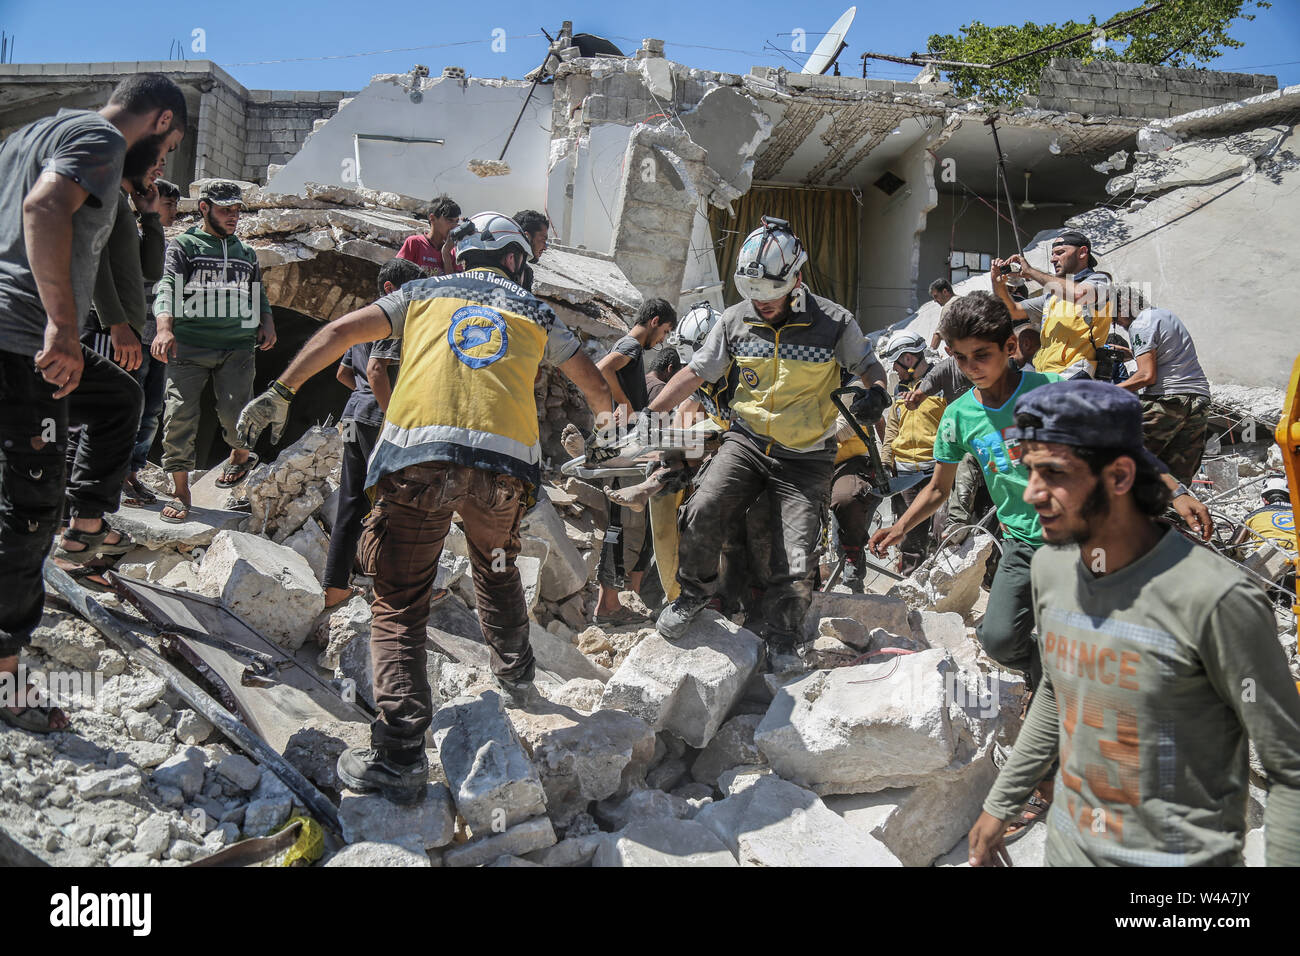 Urm Al Jaws, Syria. 21st July, 2019. Members of the Syrian Civil Defence also known as 'White Helmets' carry a victim after a building collapsed during a reported air strike by pro-regime forces in the town of Urm Al-Jaws in the south of Syria s Idlib Credit: Anas Alkharboutli/dpa/Alamy Live News Stock Photo